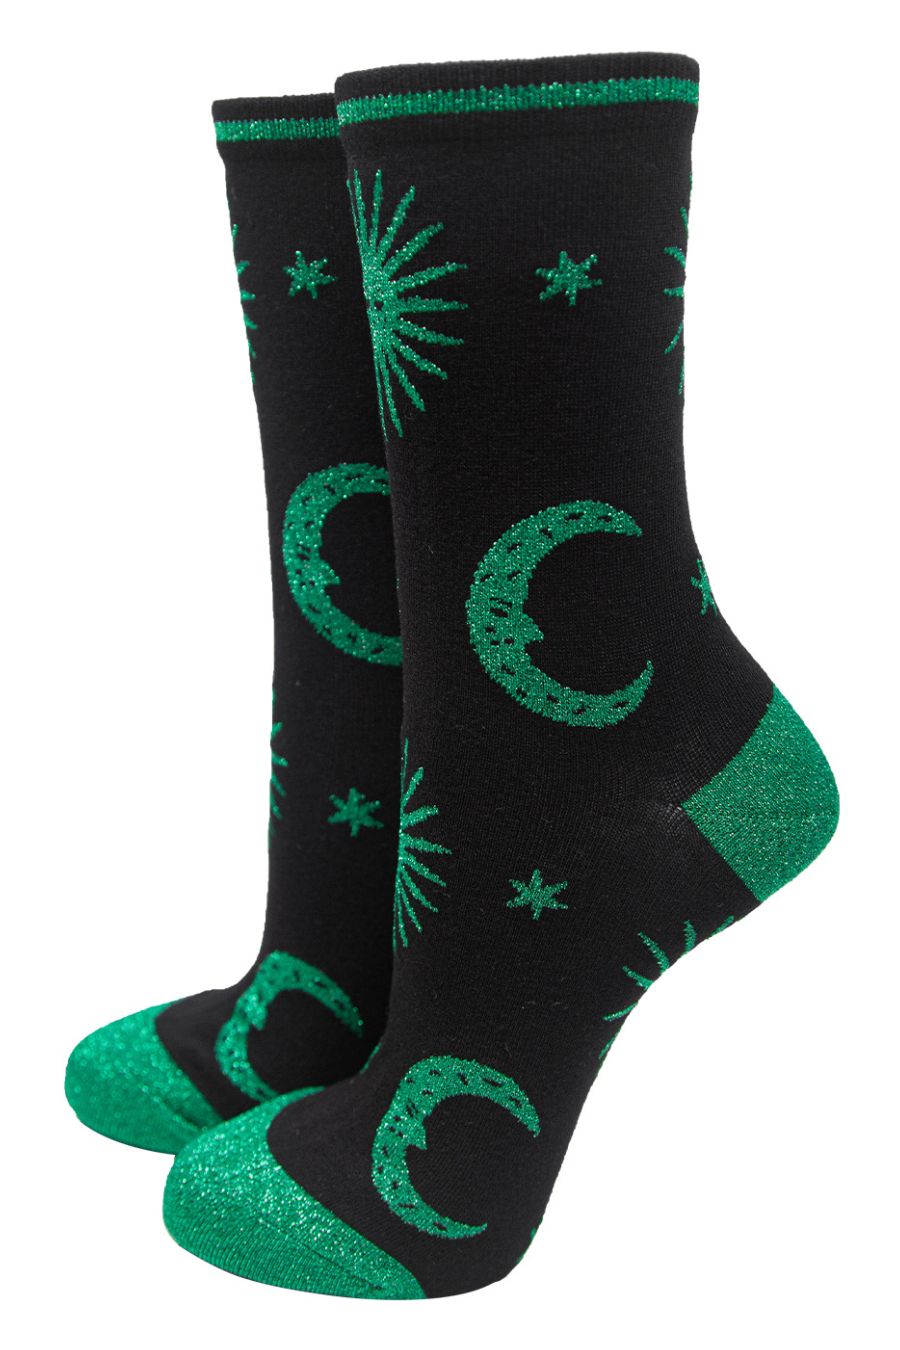 black ankle socks with green glitter stars and moons